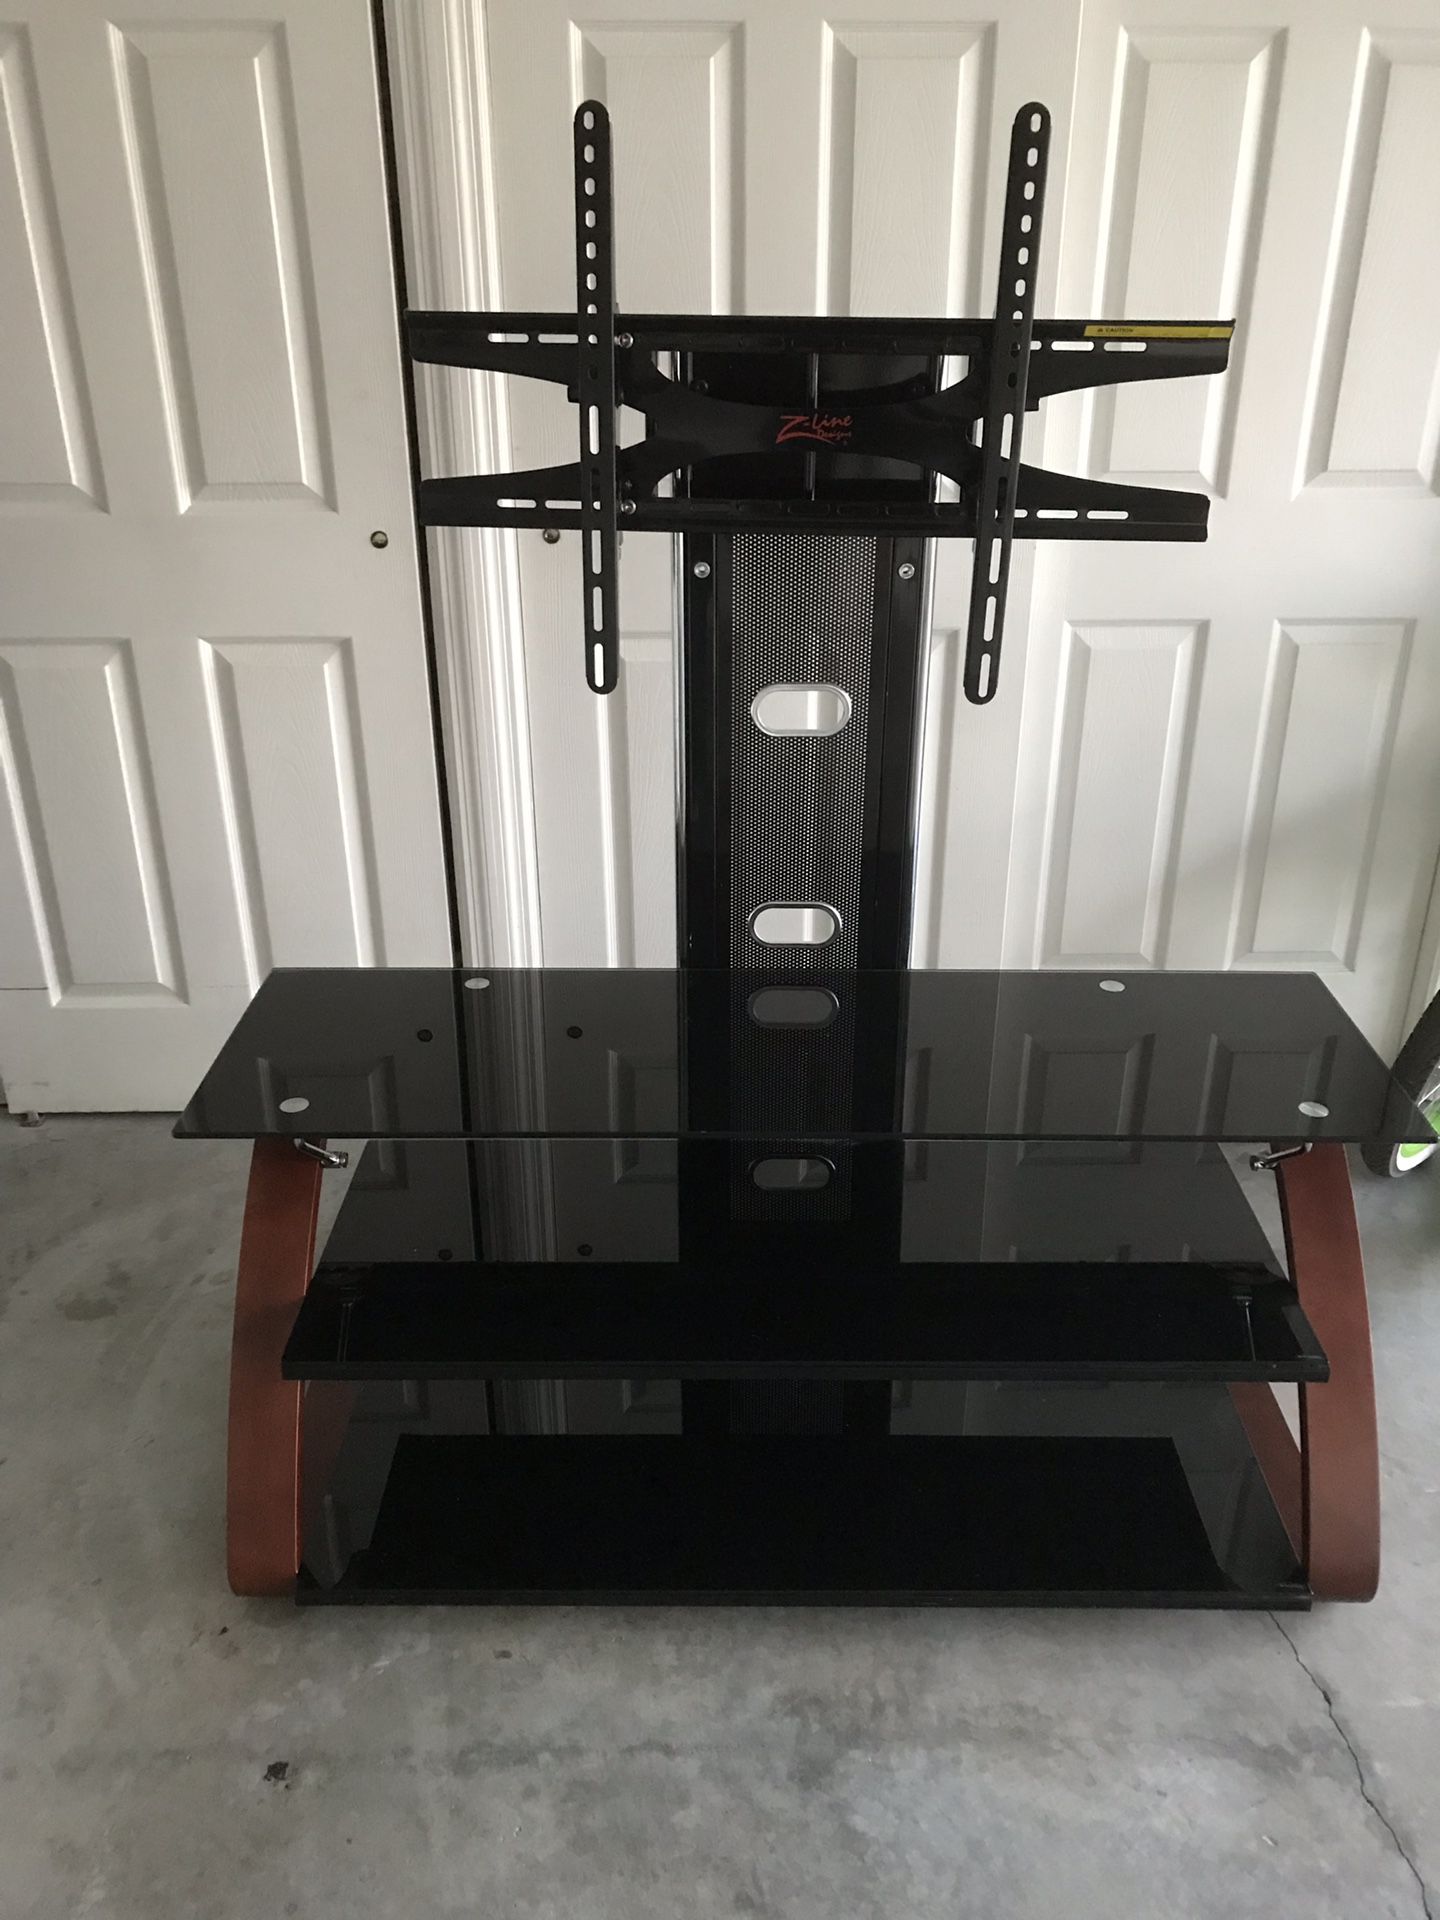 Z line brand TV stand. Holds up to 60” TV. In great condition.